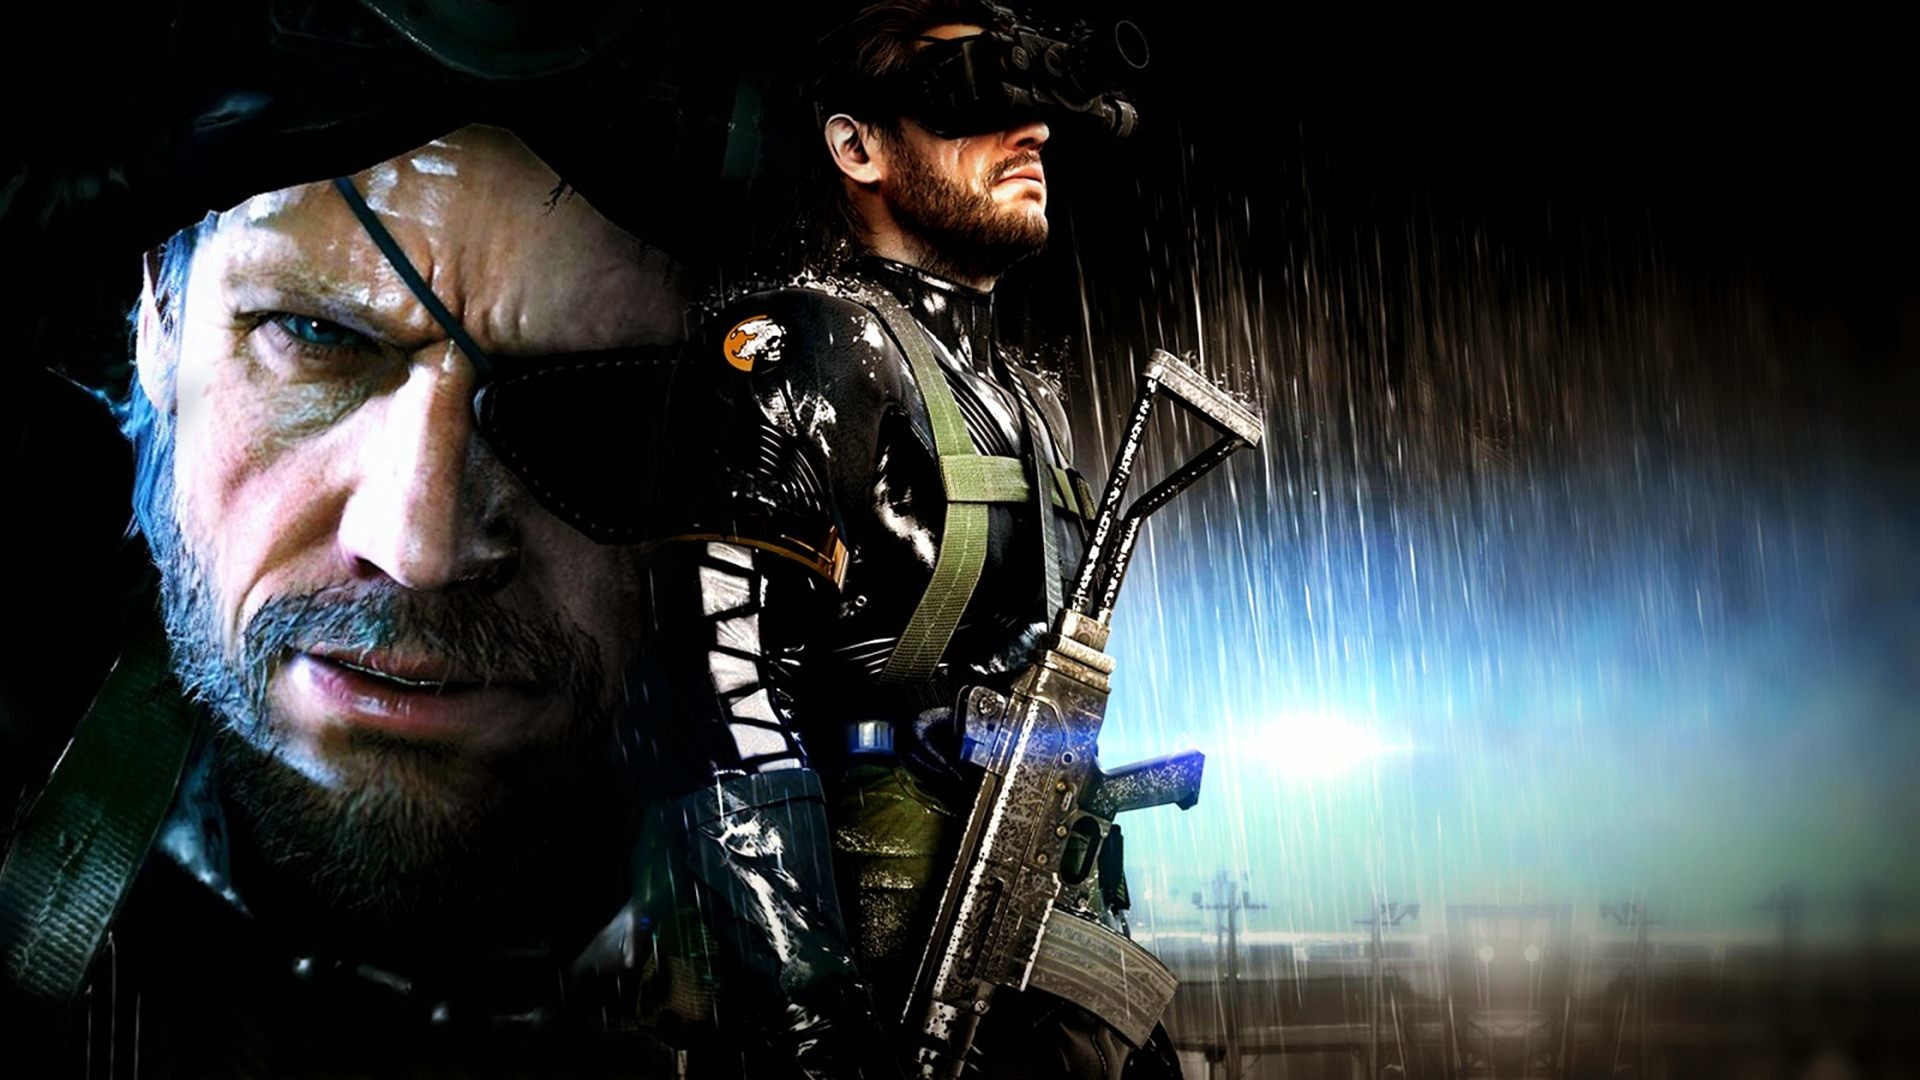 1920x1080 Metal Gear Solid V The Phantom Pain Wallpapers | HD Wallpapers Tactical  Espionage Operations Full HD Wallpaper and Background .